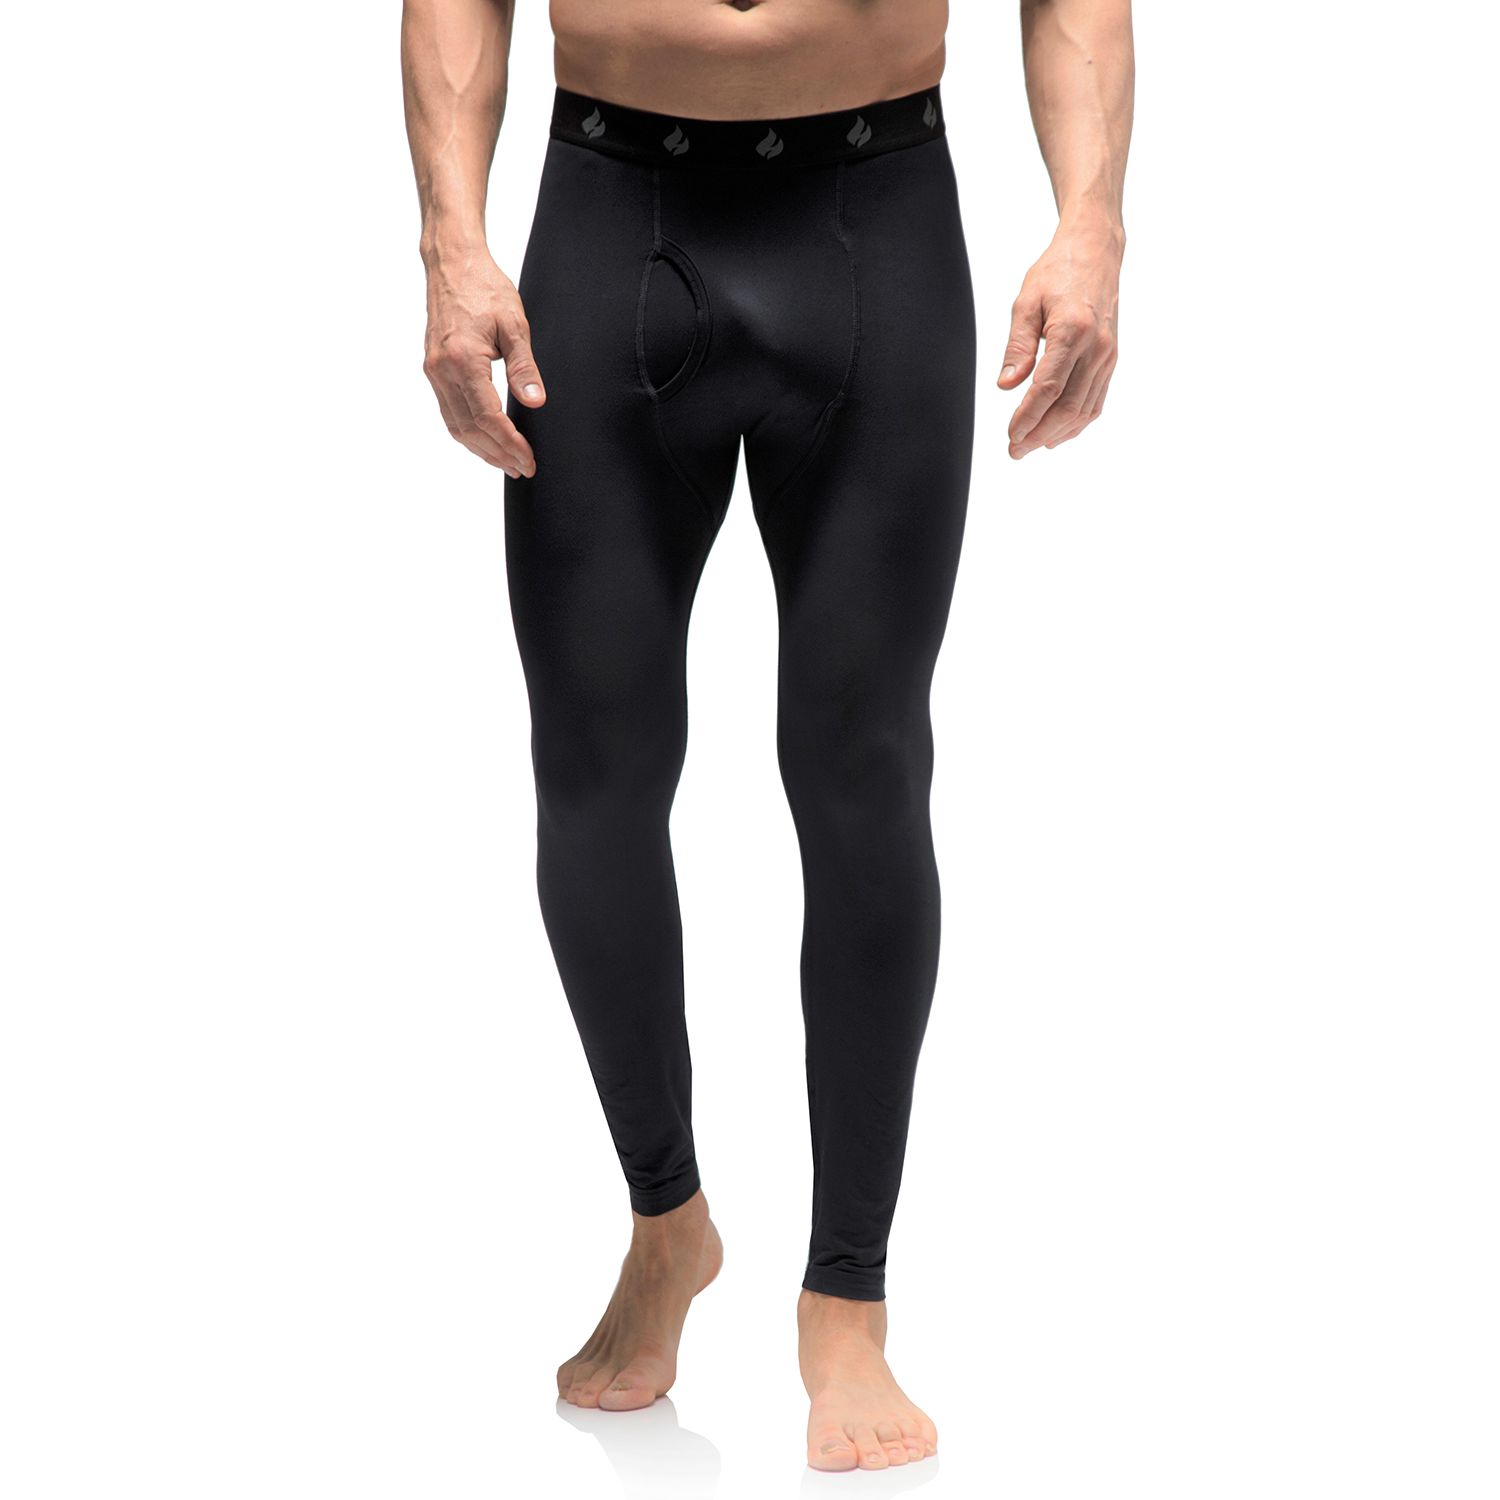 Image for Heat Holders Men's Warm Base Layer Pants at Kohl's.